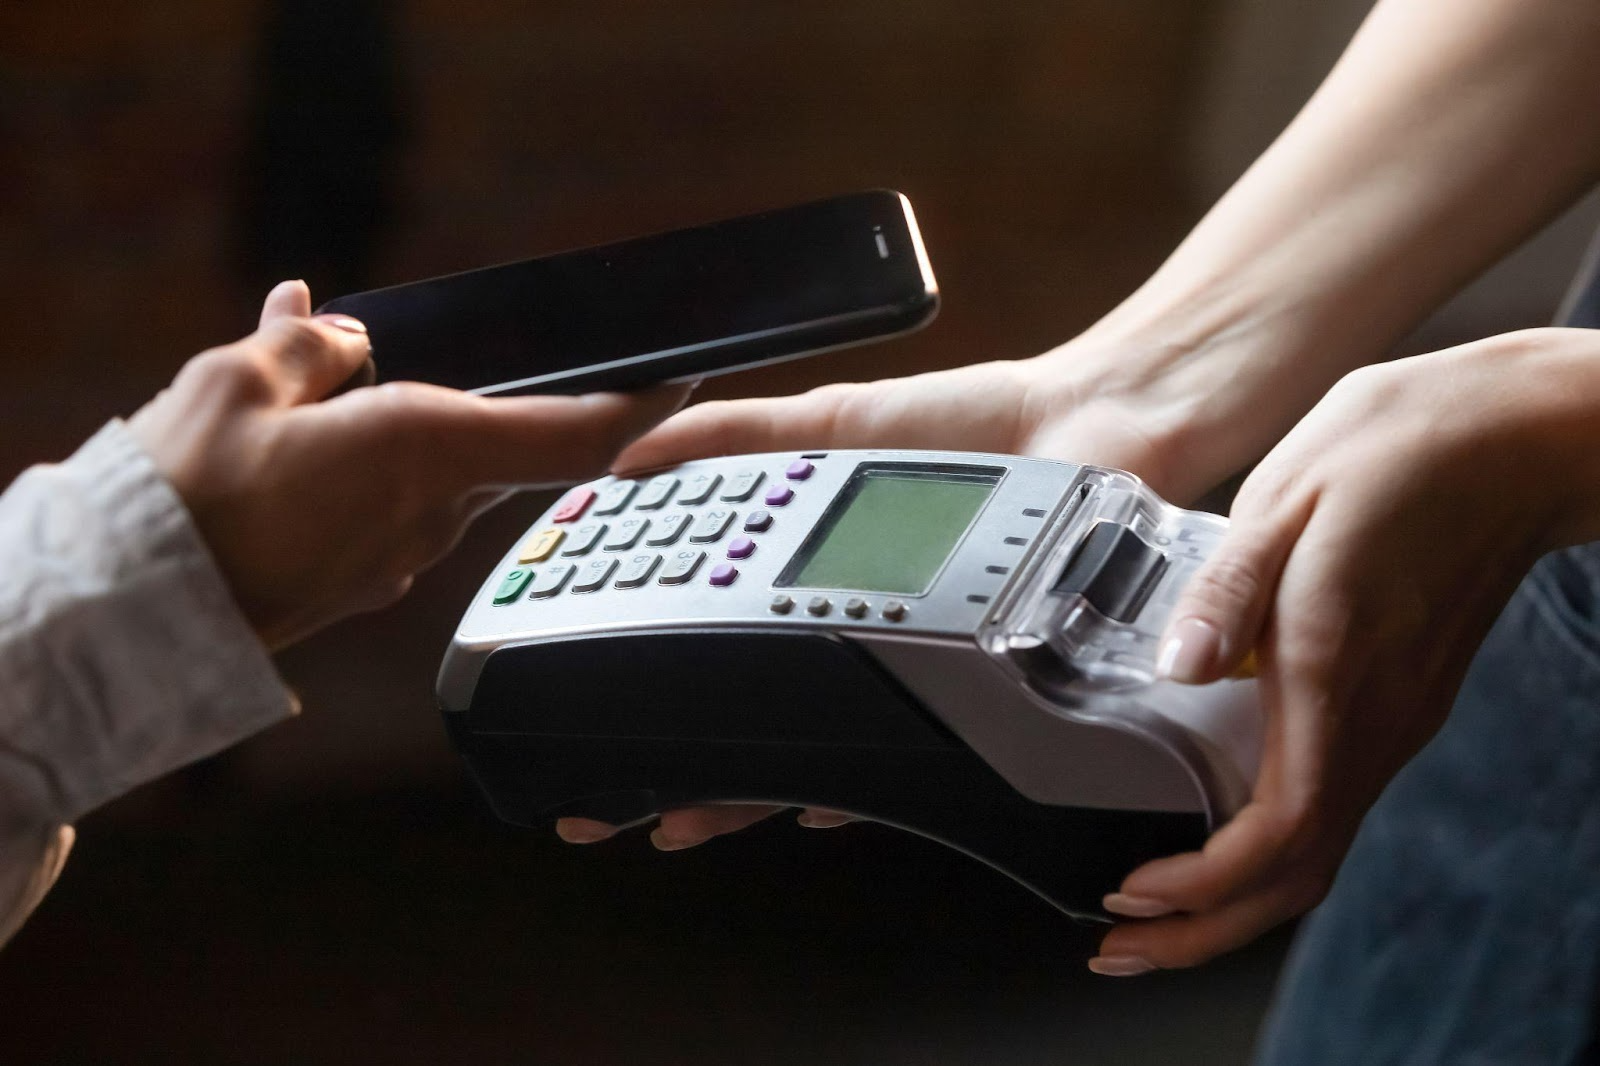 How to Install or Replace the Battery in a Mobile EFTPOS Machine